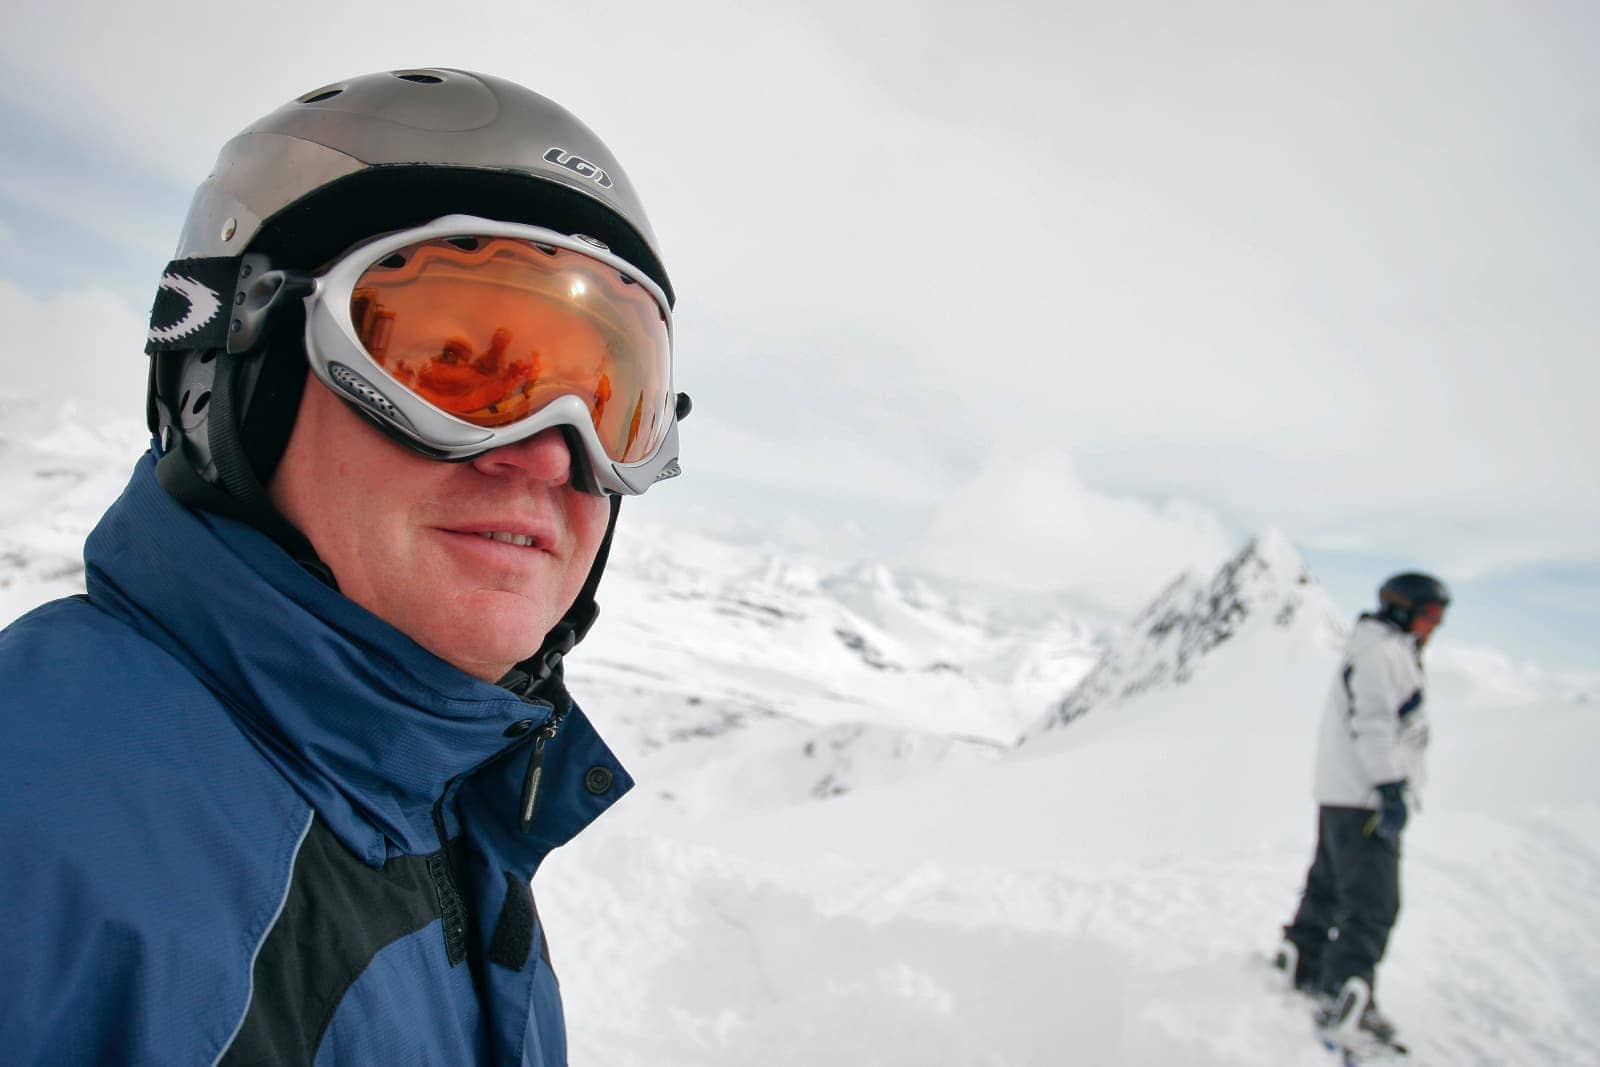 Man with orange tinted ski goggles and blue jacket